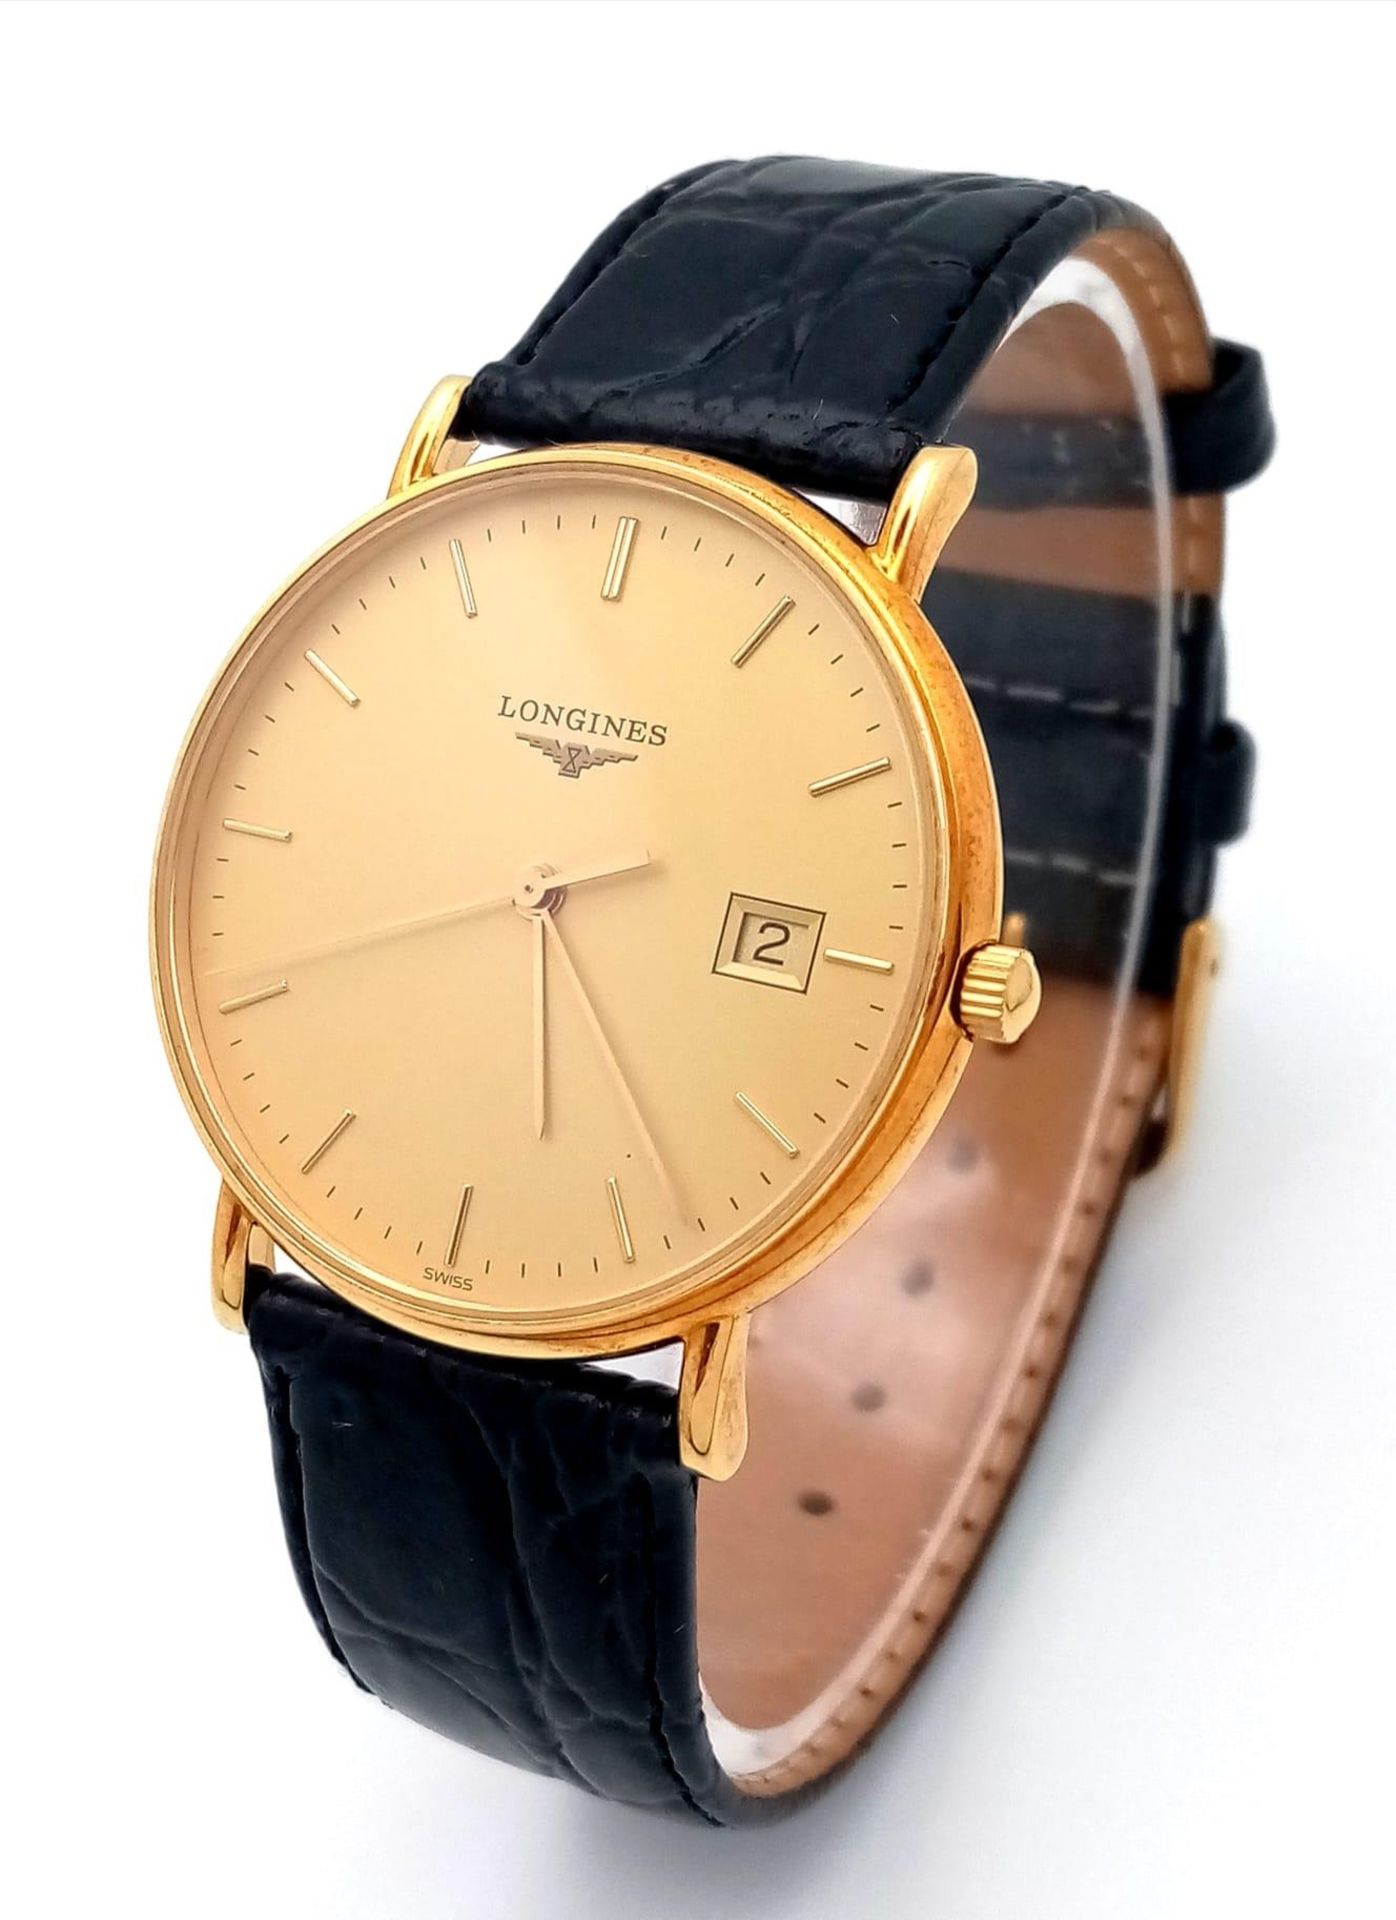 A Longine 18K Gold Cased Gents Watch. Black leather strap. 18k gold case - 33mm. Gilded dial with